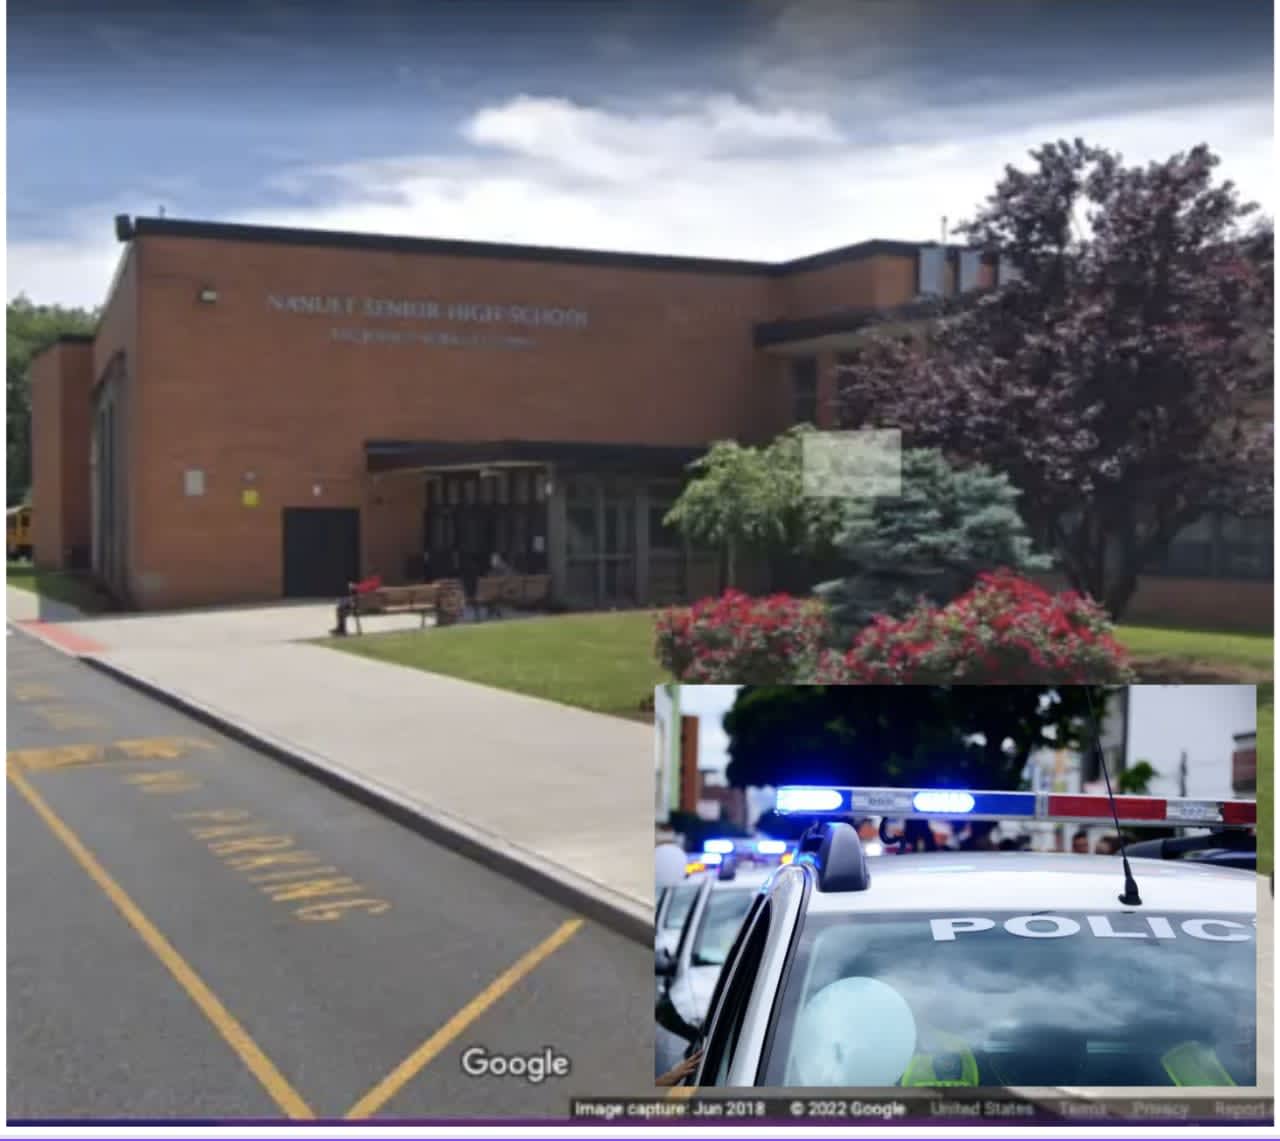 A student at Nanuet High School was charged for allegedly having a loaded gun.